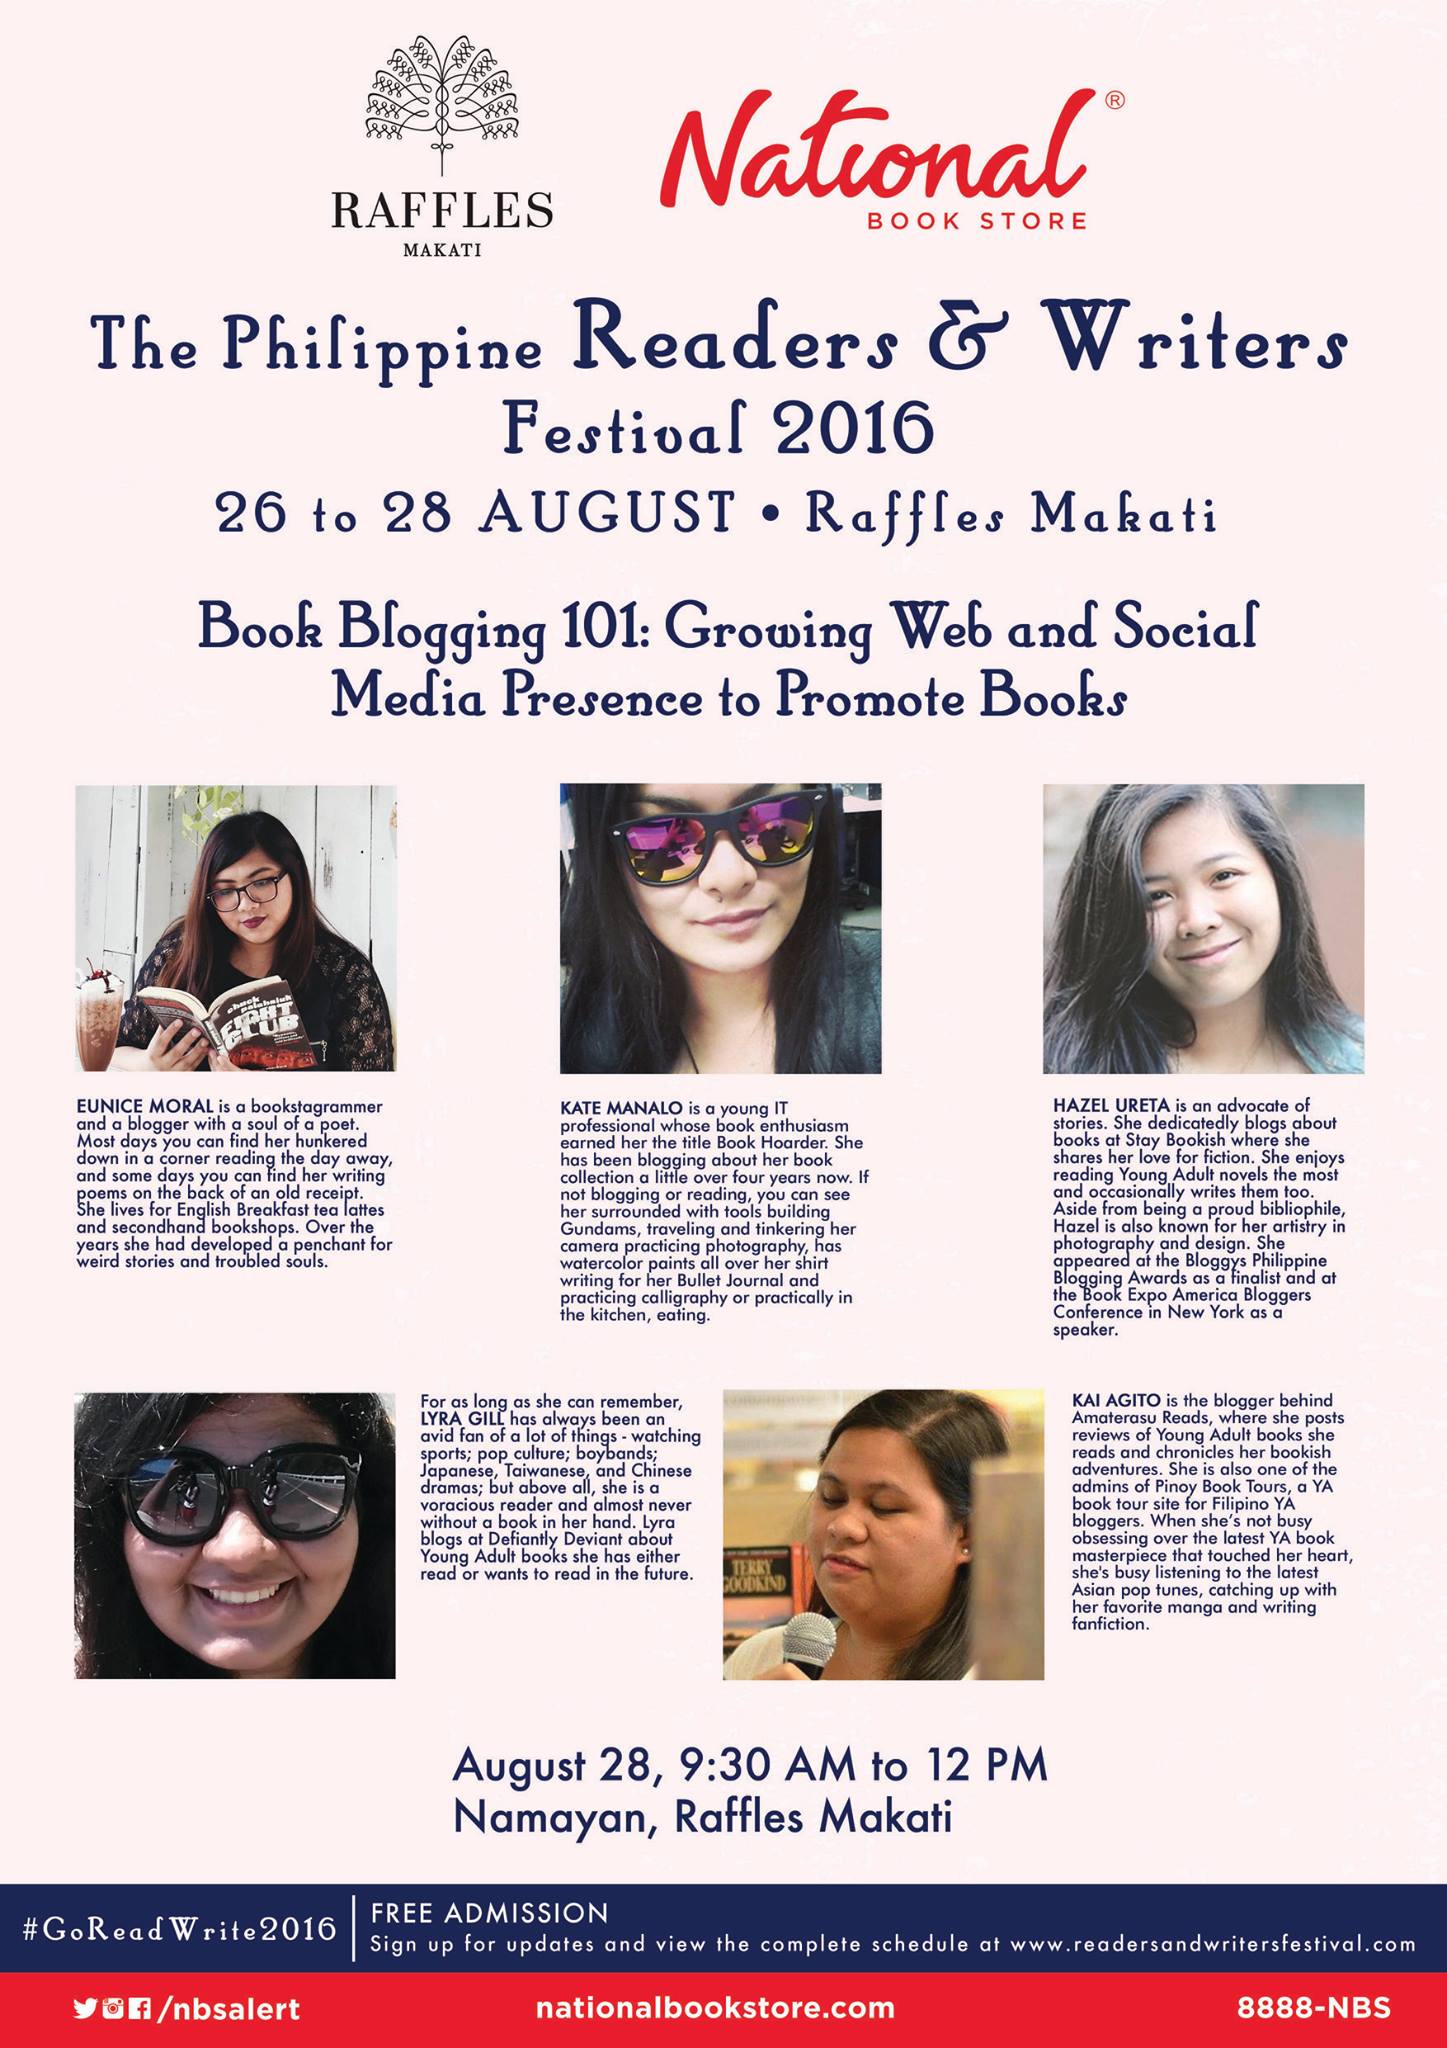 The Philippine Readers and Writers Festival - Book Blogging Panel